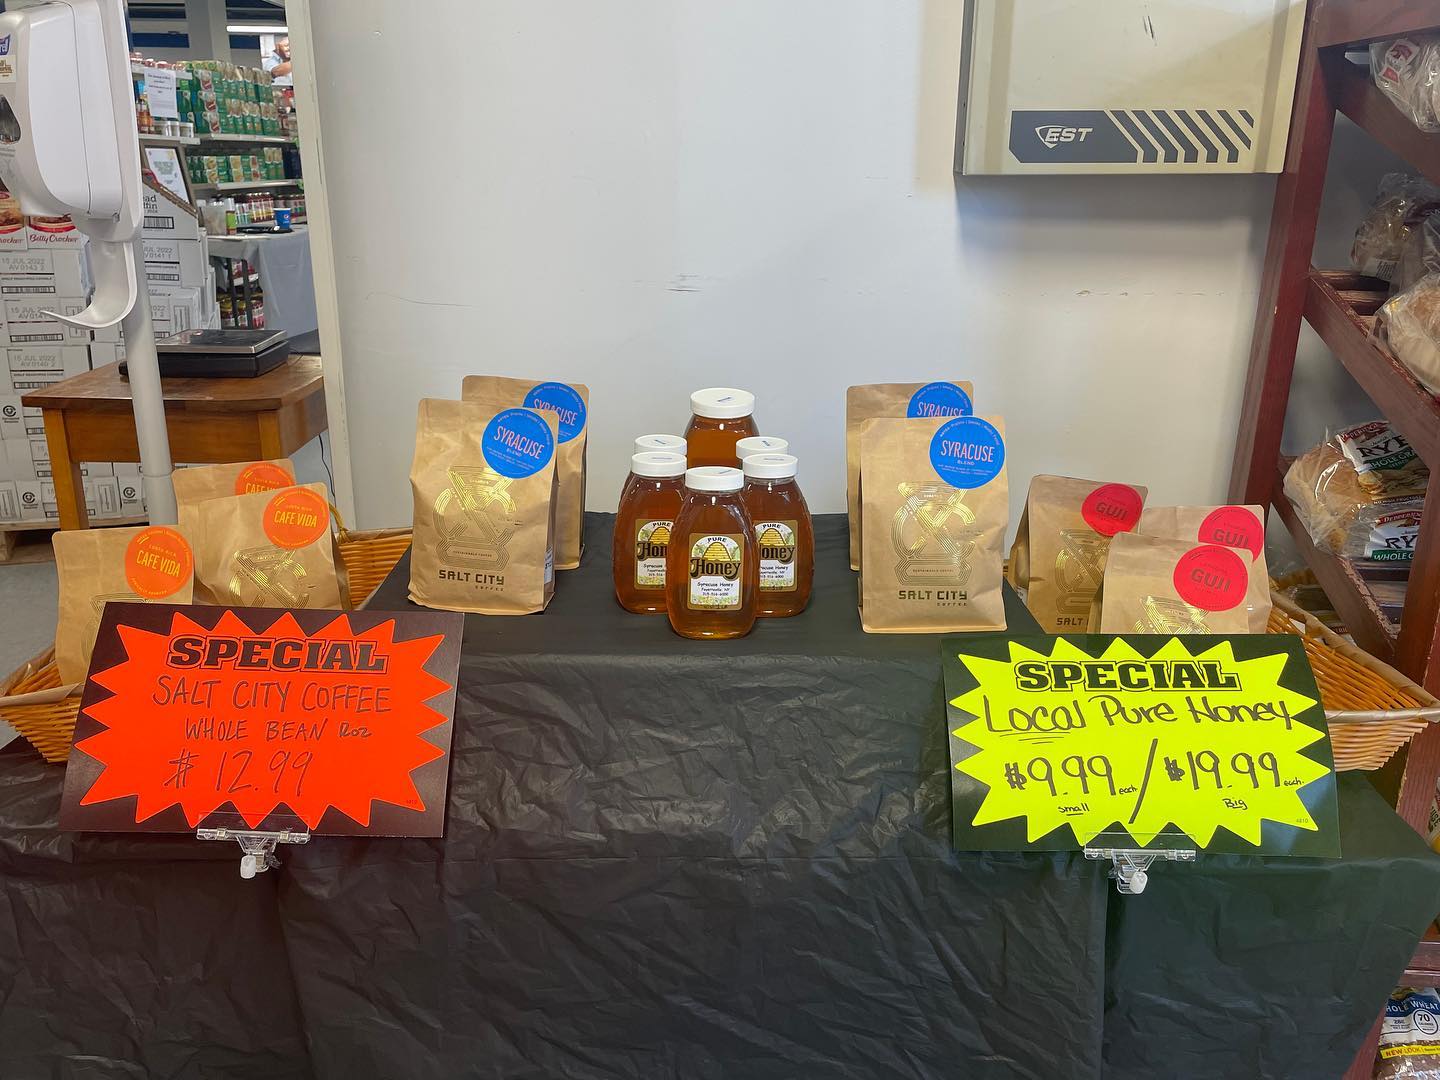 Come on in to Brady Market for some local #SYR products! We’ve got @saltcitycoffee on the shelves and @syracuse_honey here for you! #shoplocal #supportsmallbusiness